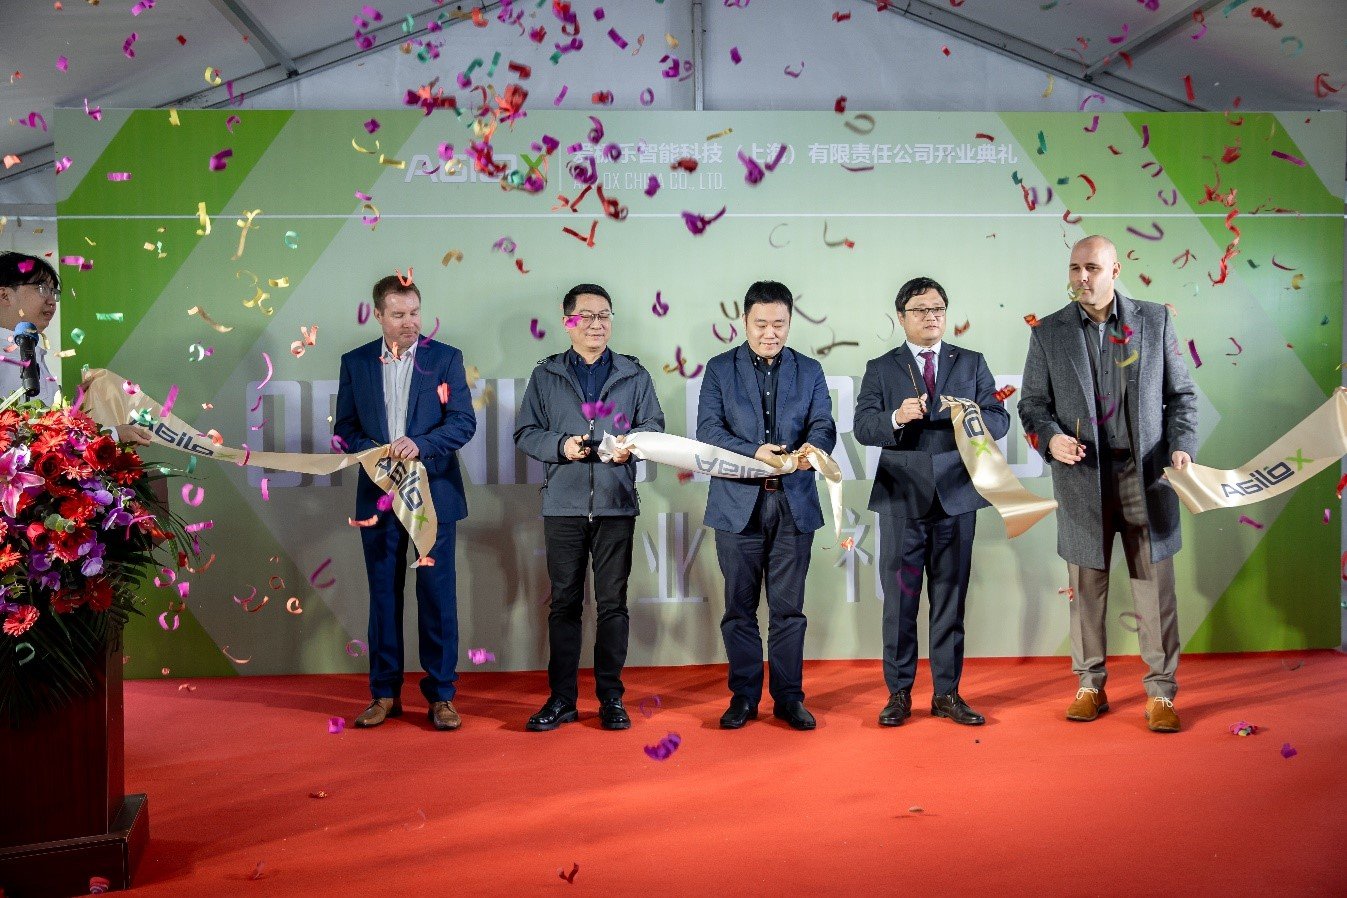 Official opening ceremony of AGILOX China